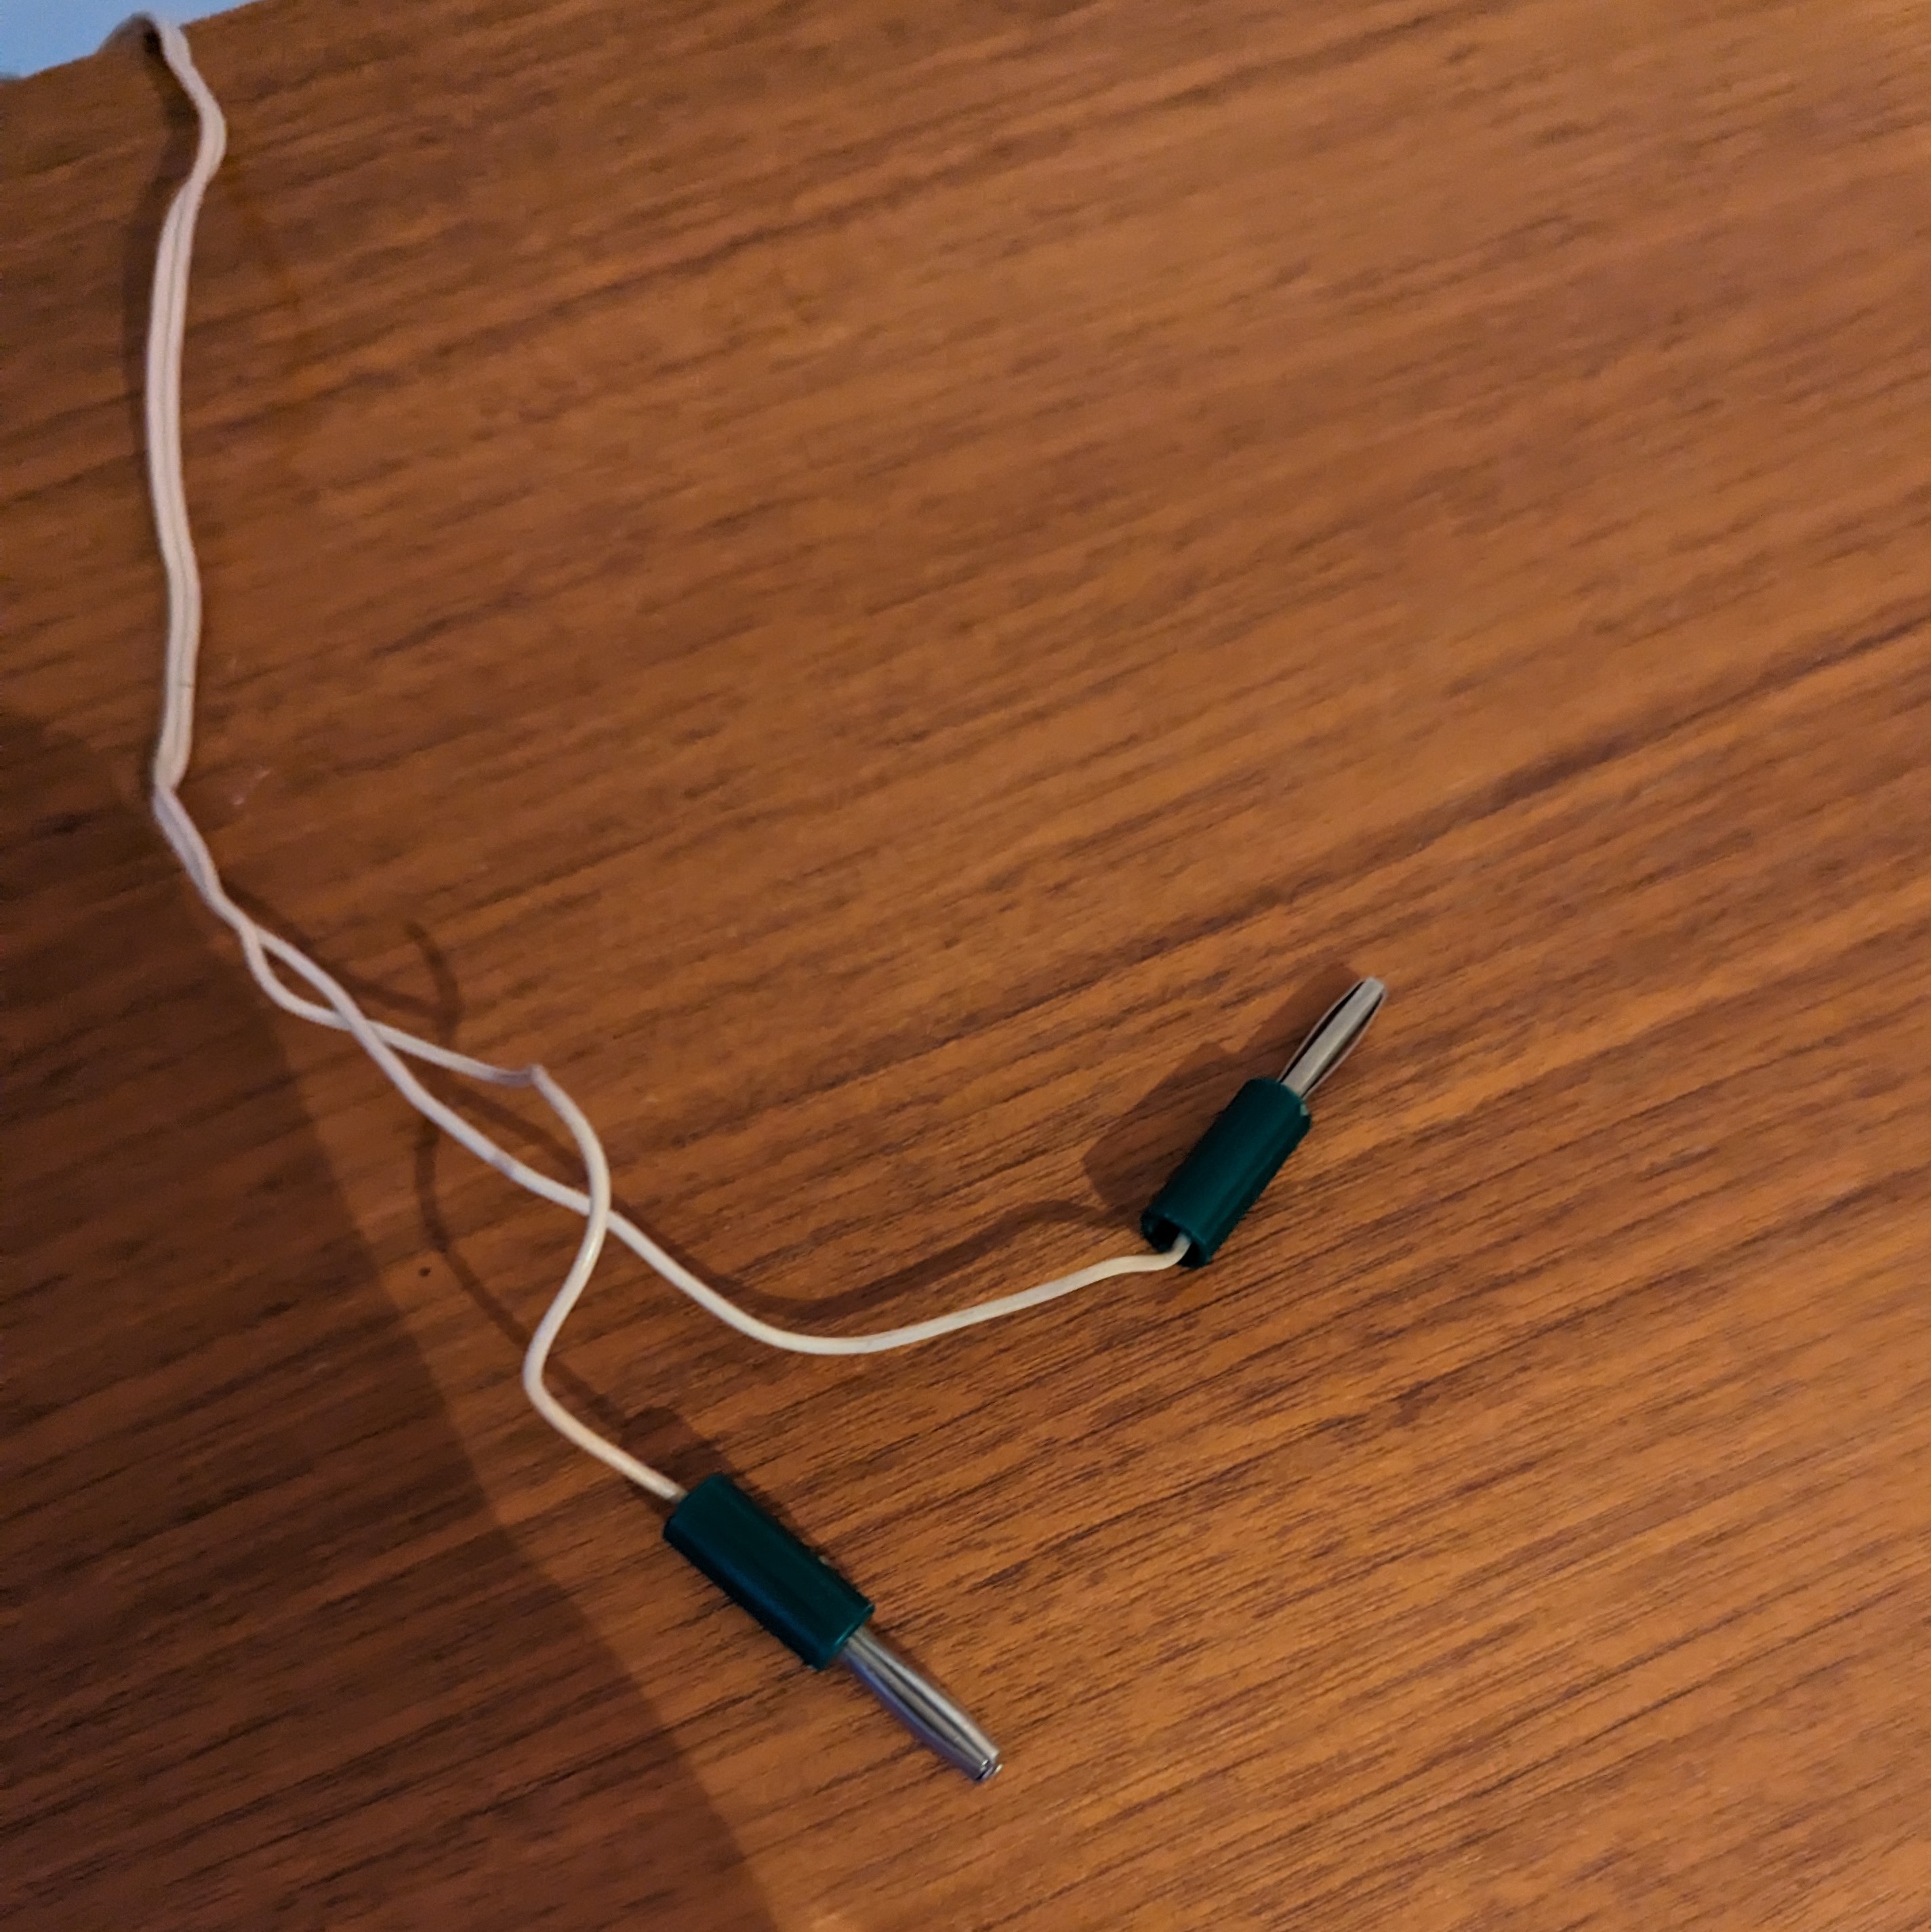 Two cables with male banana connectors attached.